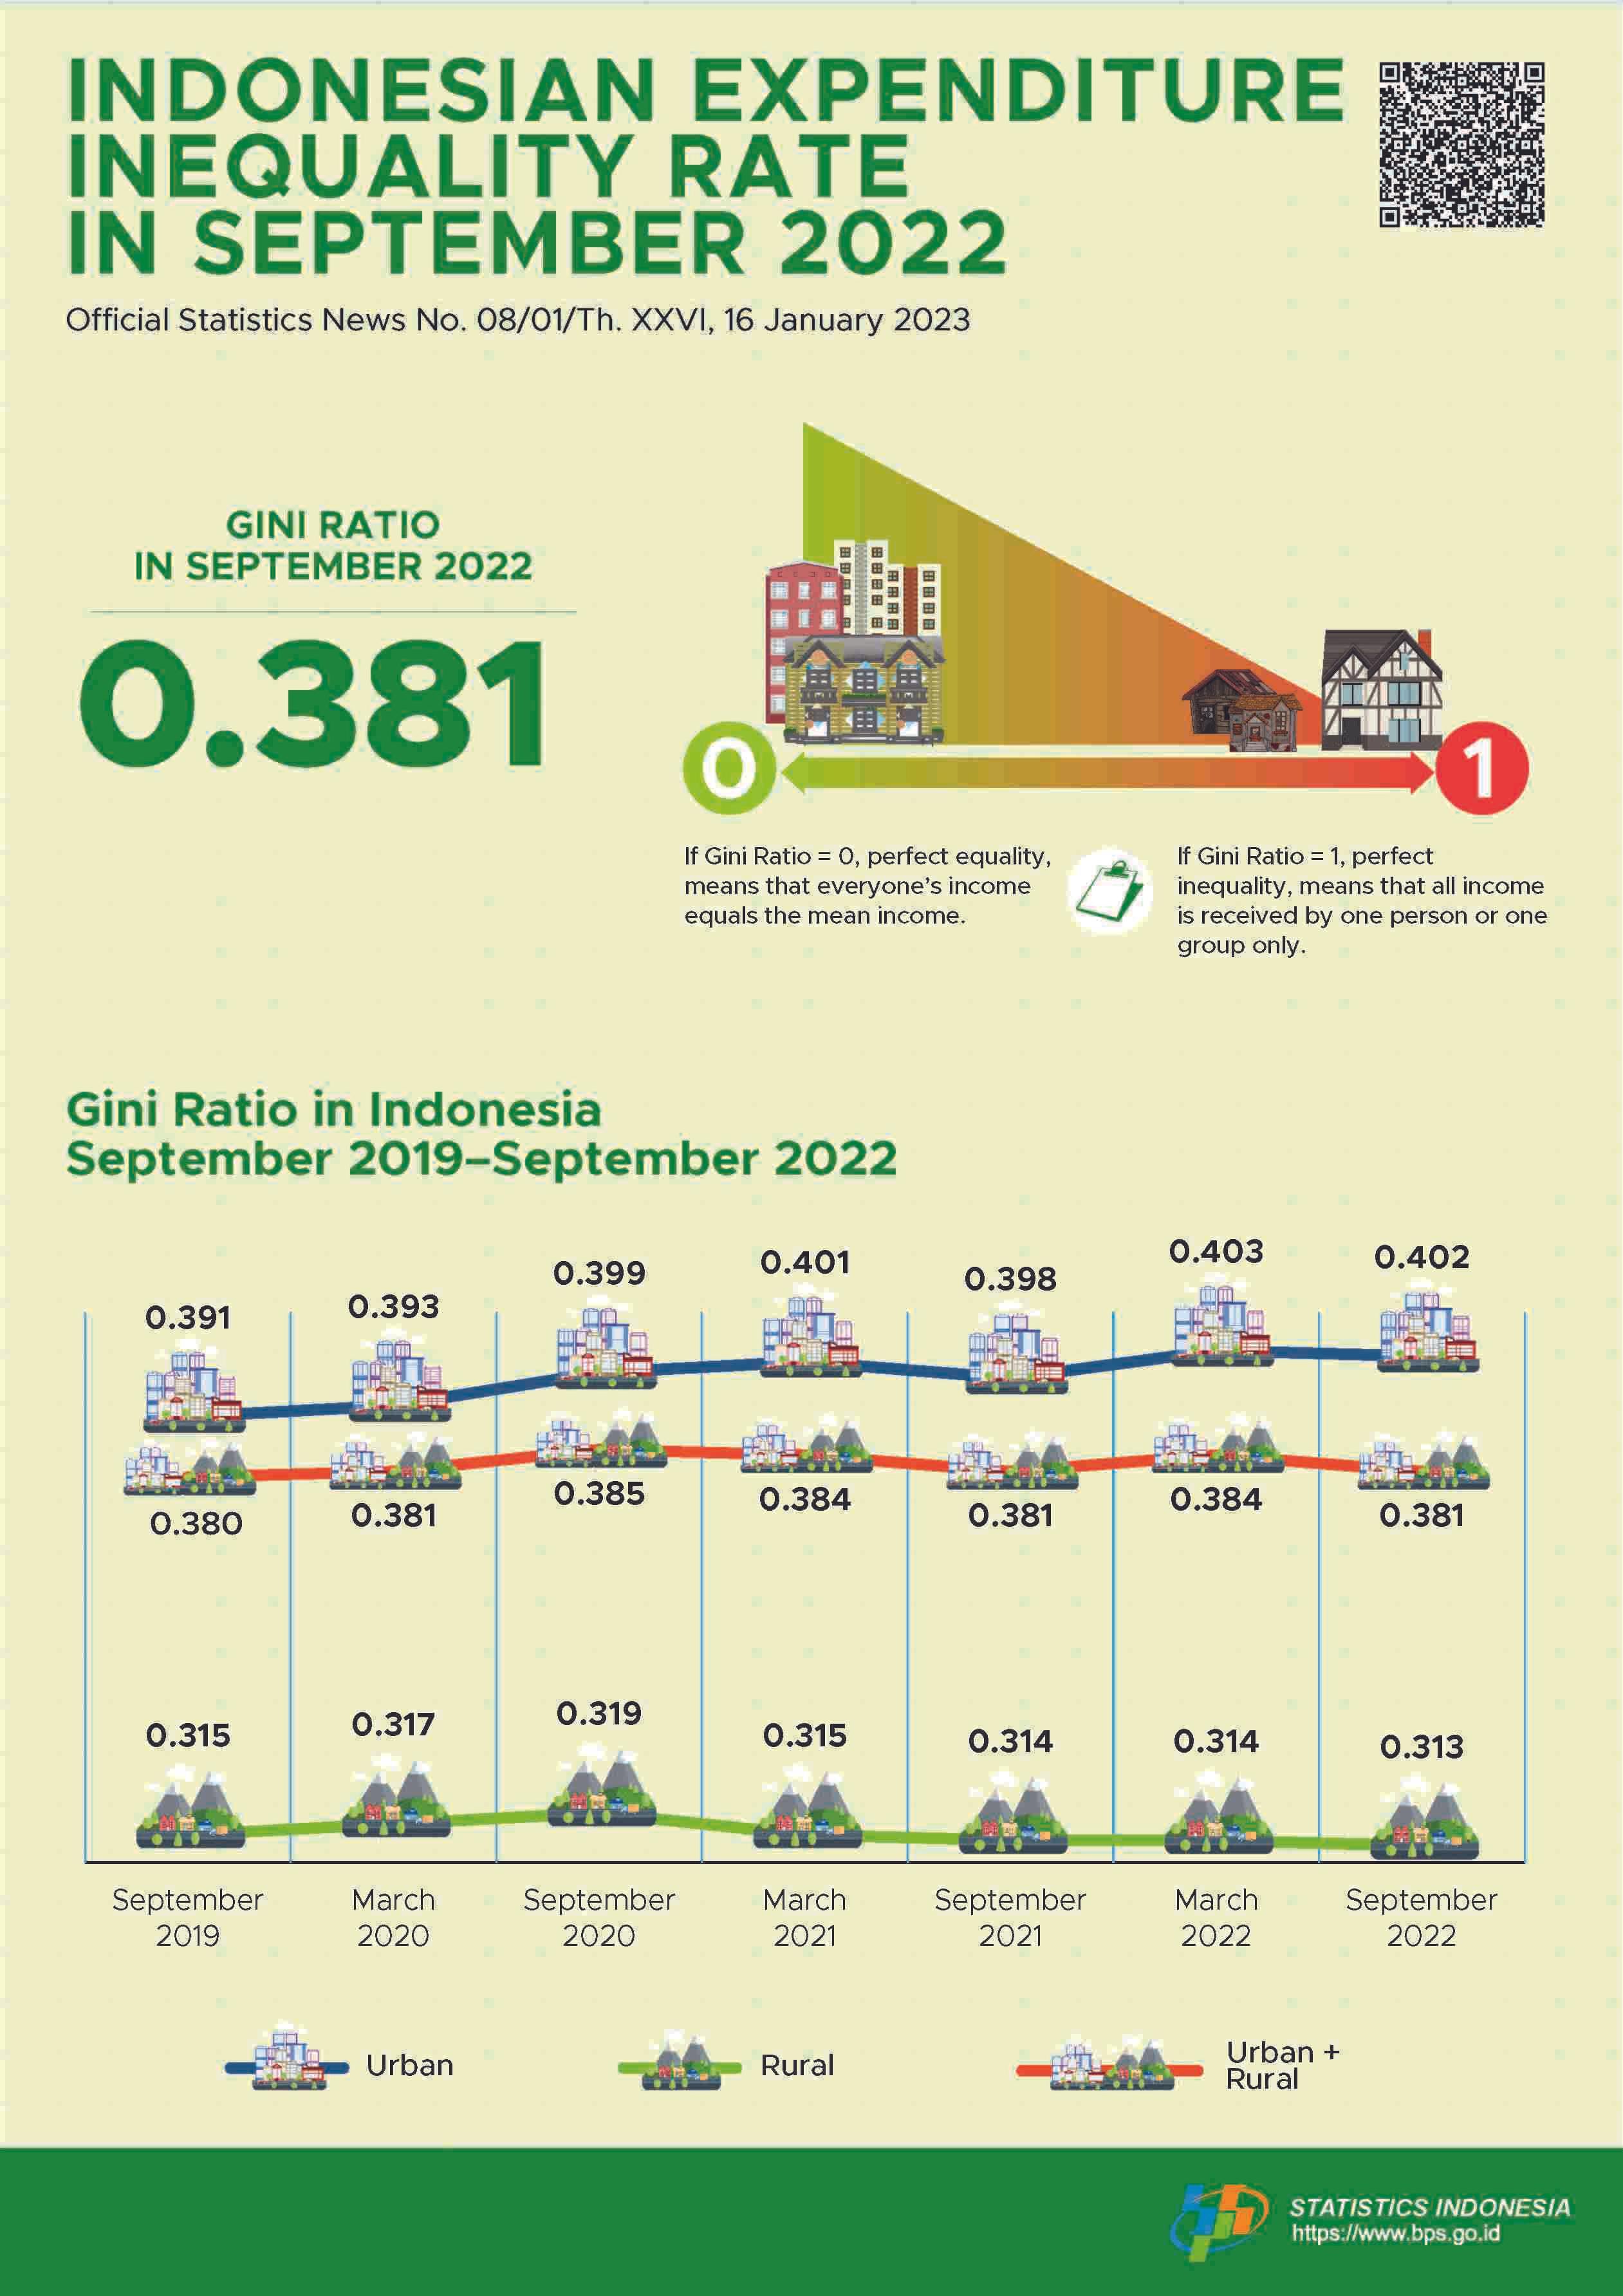 Gini Ratio in September 2022 was 0.381